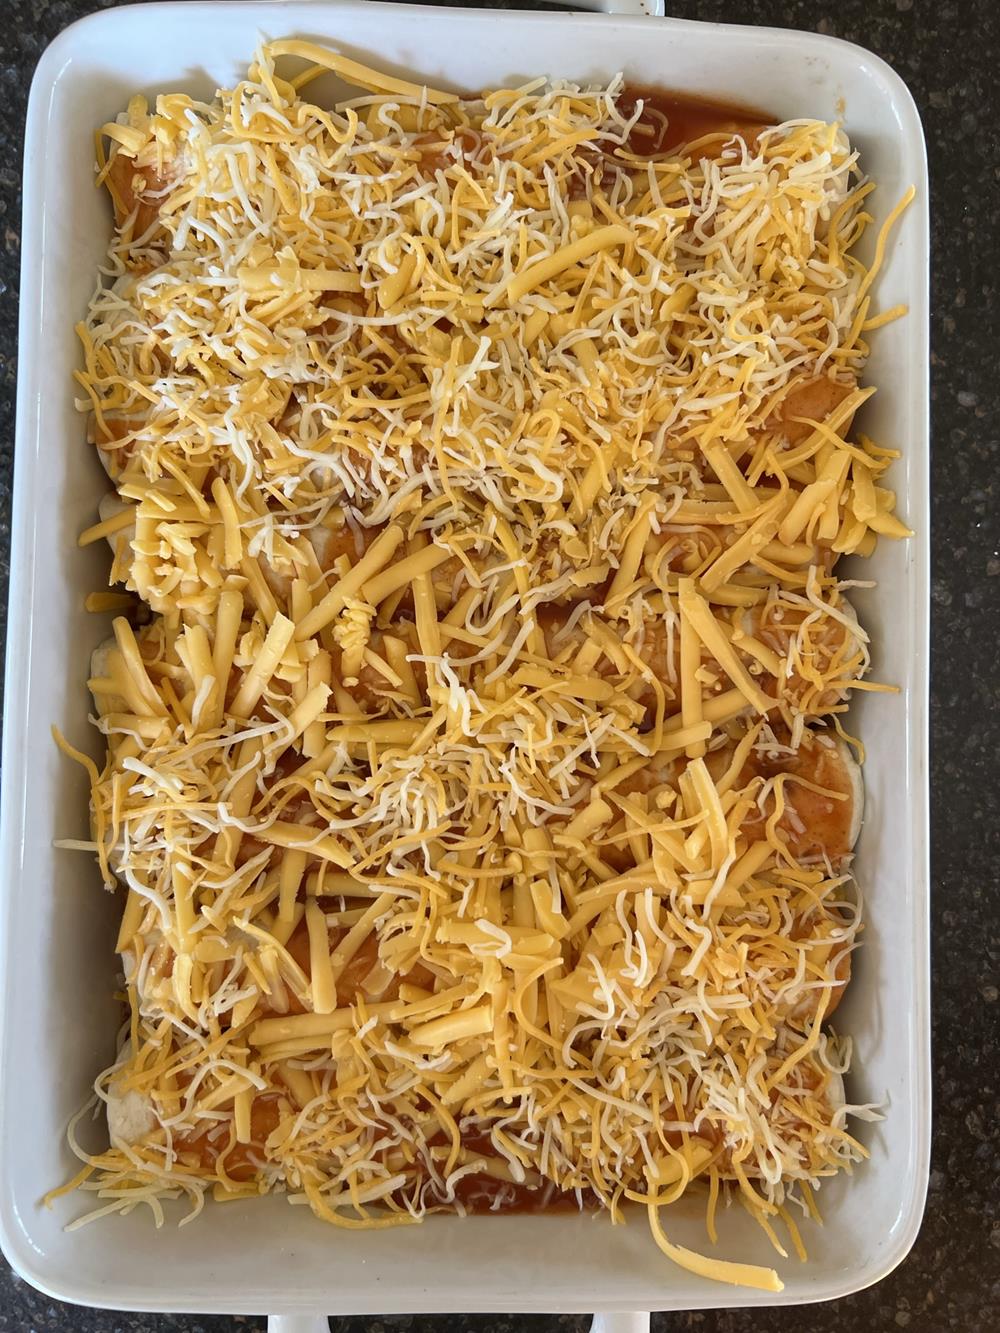 unbaked chicken enchiladas with cheese in white pan